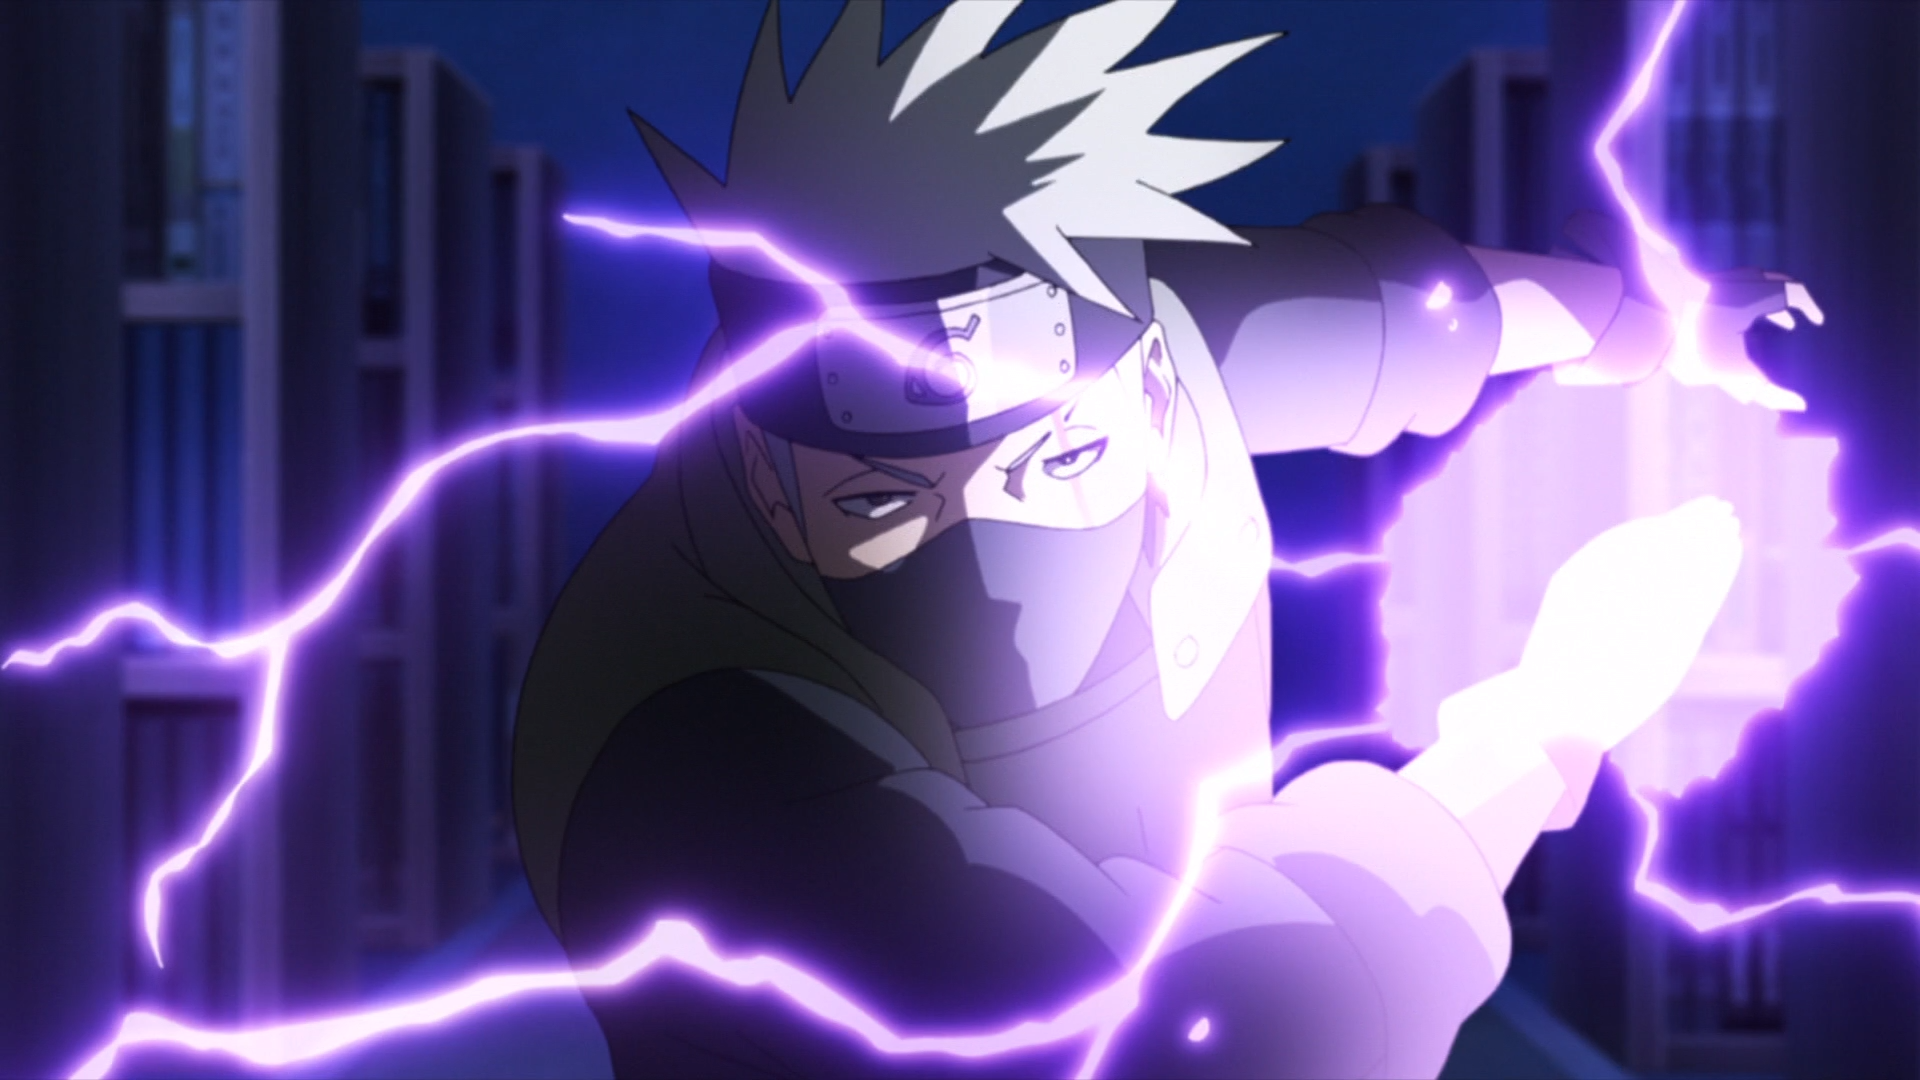 Kakashi rushing forward, his hand enveloped in a stream of purple electricity